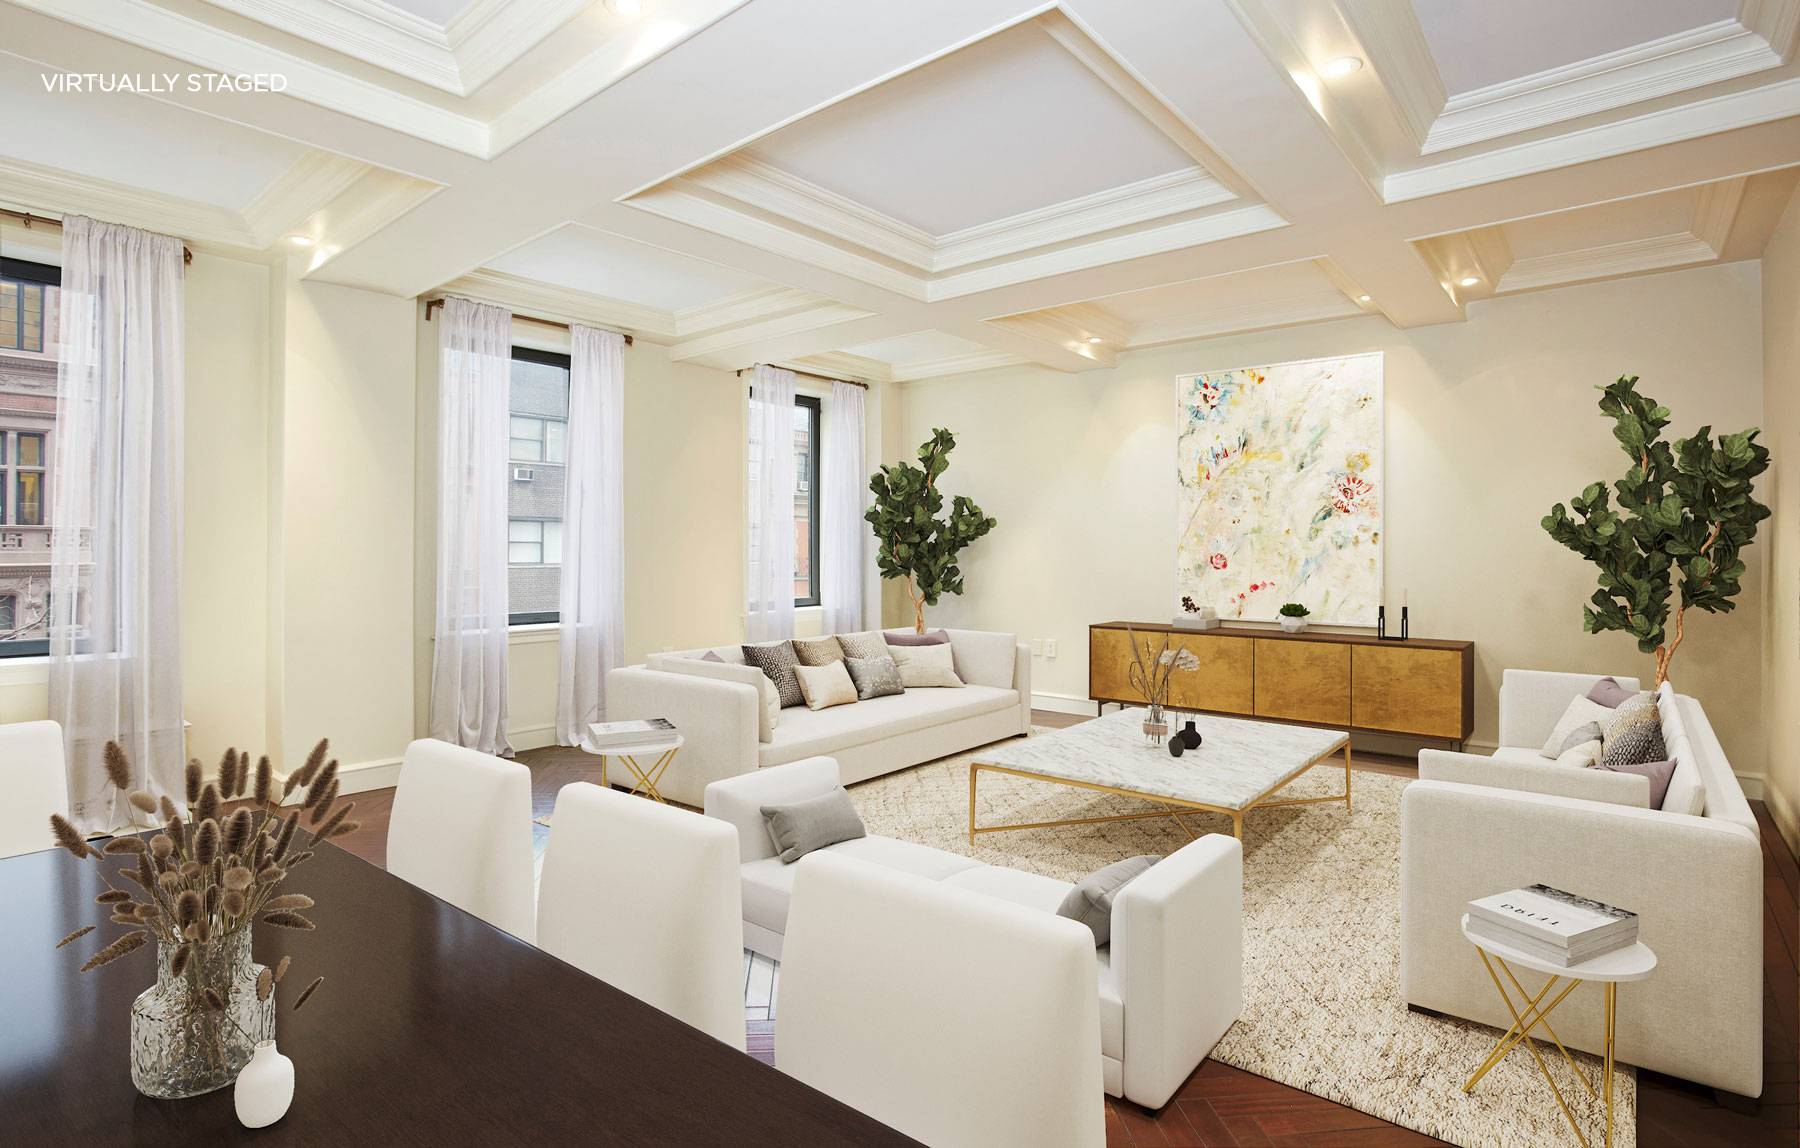 The Upper East Side's Historical District, in particular between Fifth and Madison Avenues, is home to some of the most desirable residential real estate in New York City.